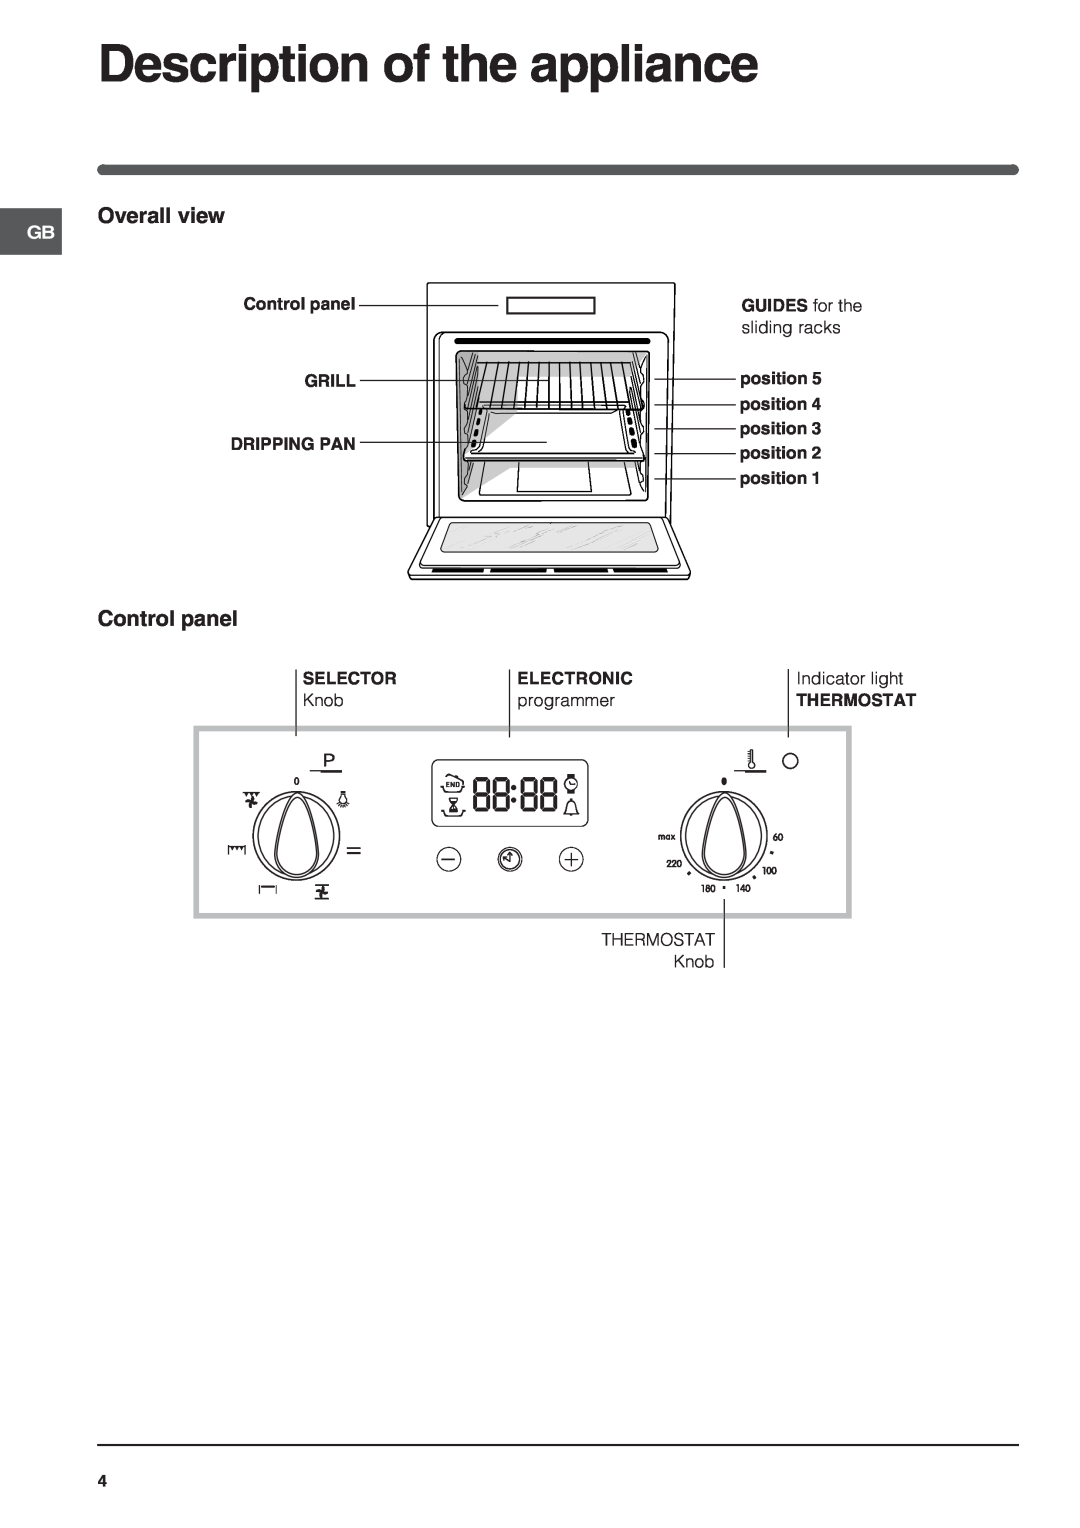 Indesit FIE 56 K.B GB/1, FIE 56 K.B IX GB/1 manual Description of the appliance, Overall view, Control panel 